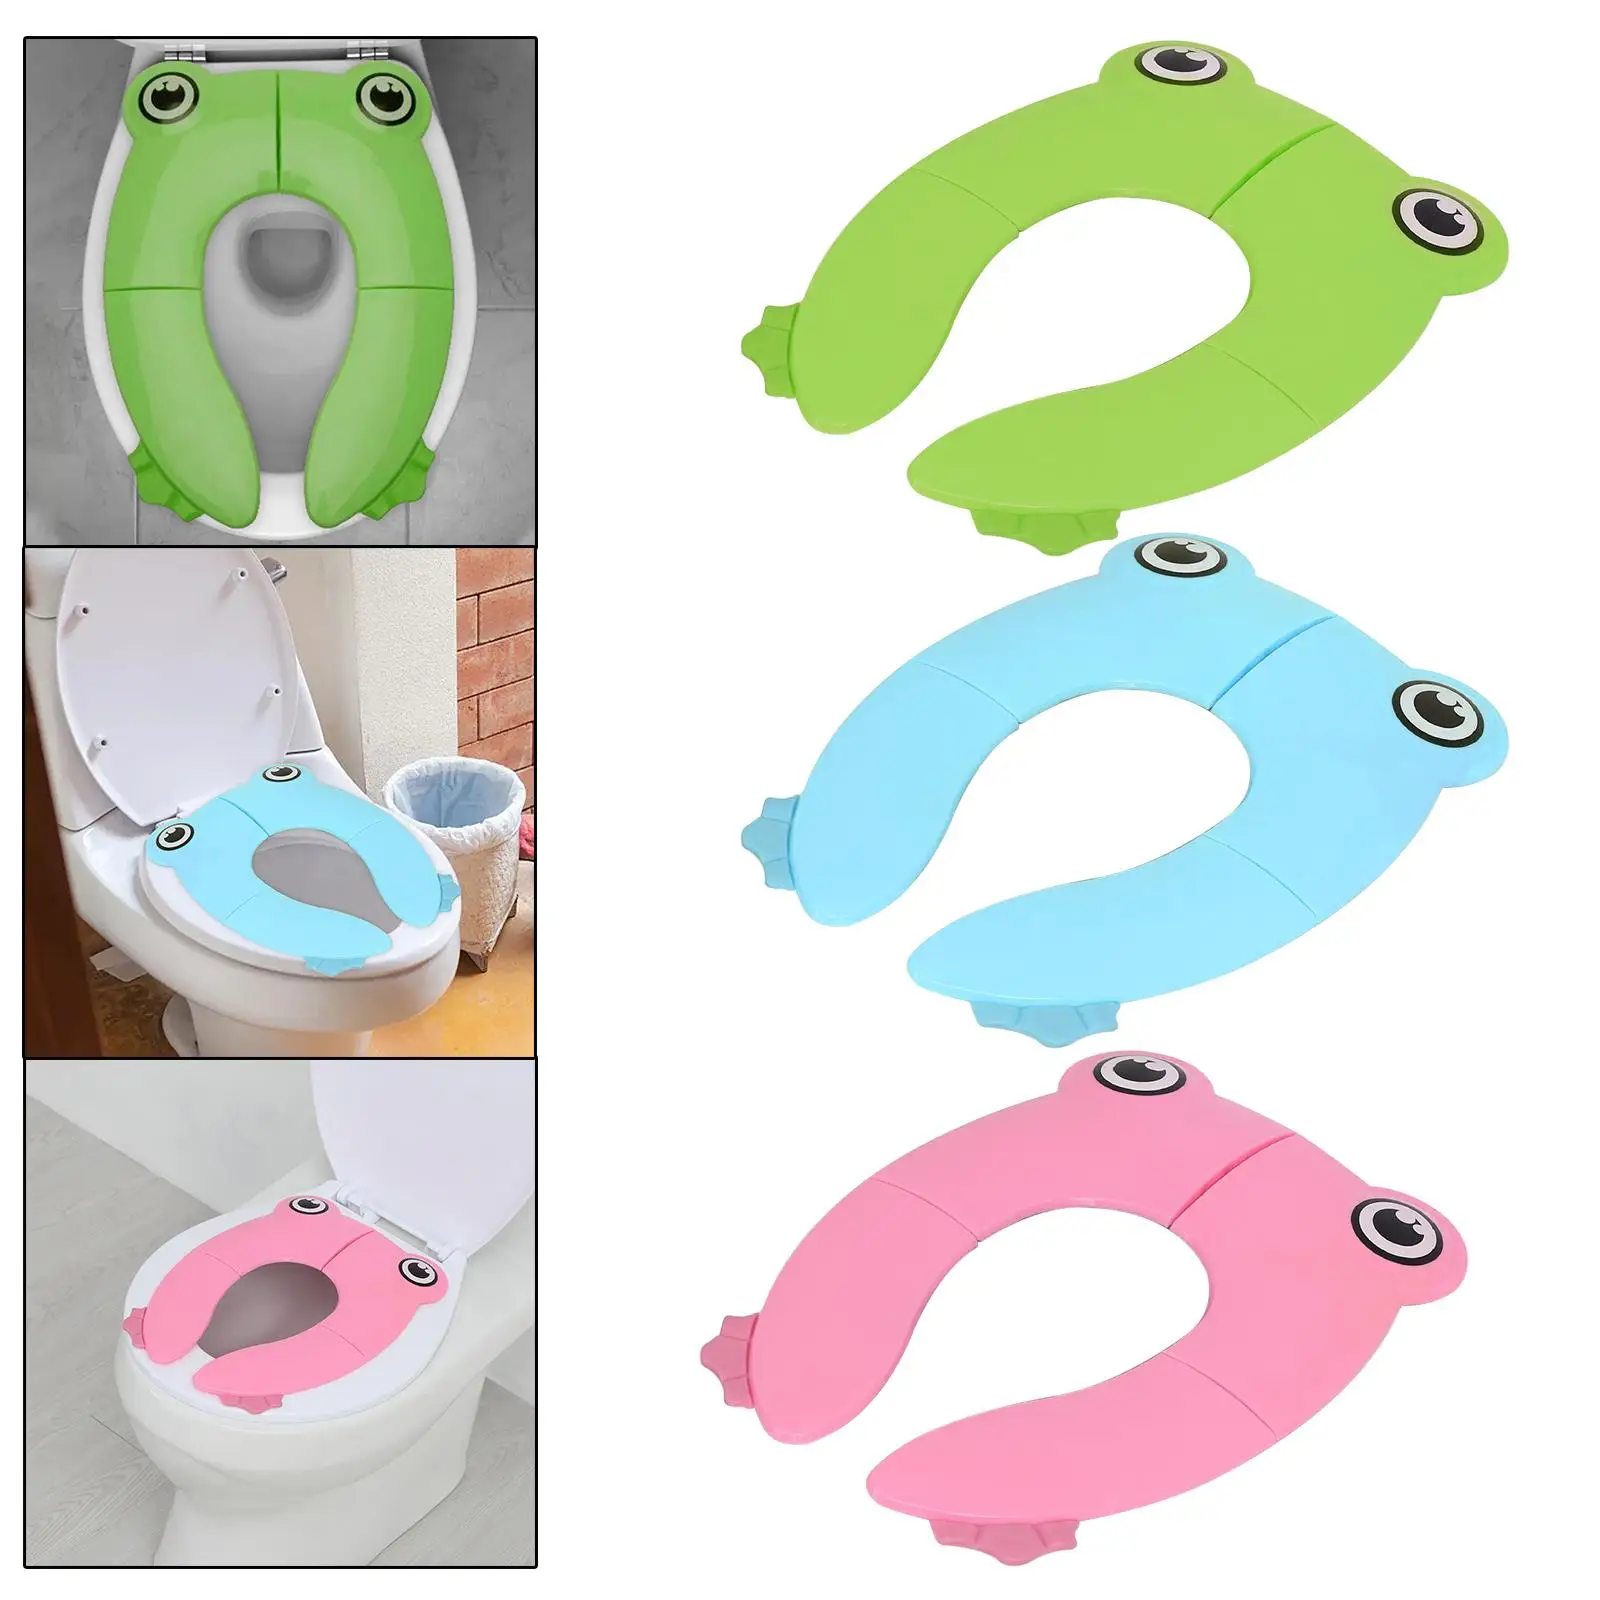 Foldable Potty Seat Pad with Storage Bag for Home Use Traveling Toddler